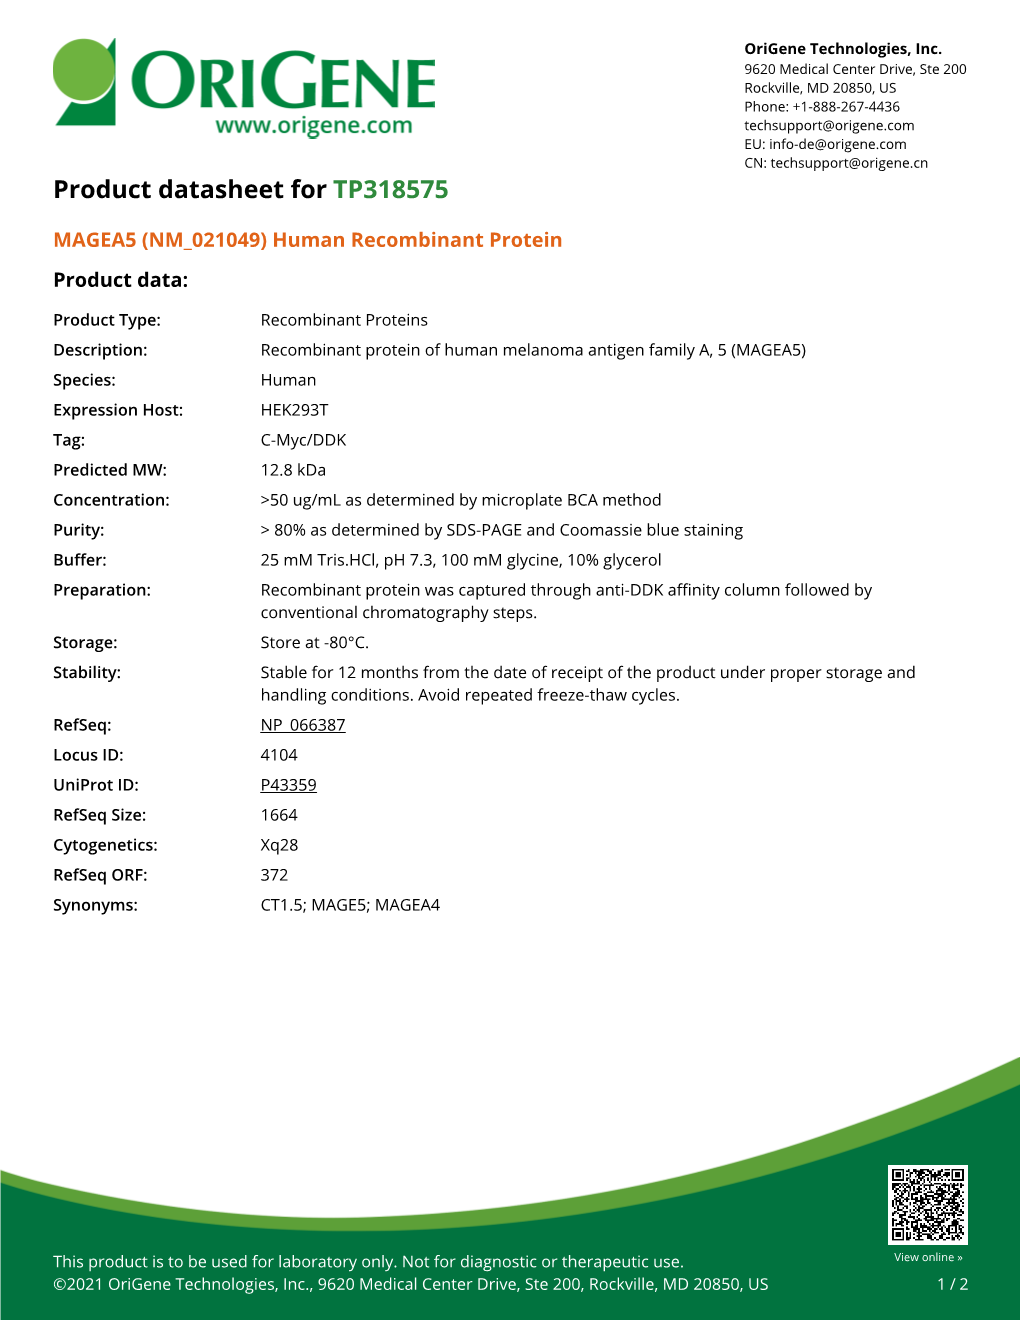 MAGEA5 (NM 021049) Human Recombinant Protein – TP318575